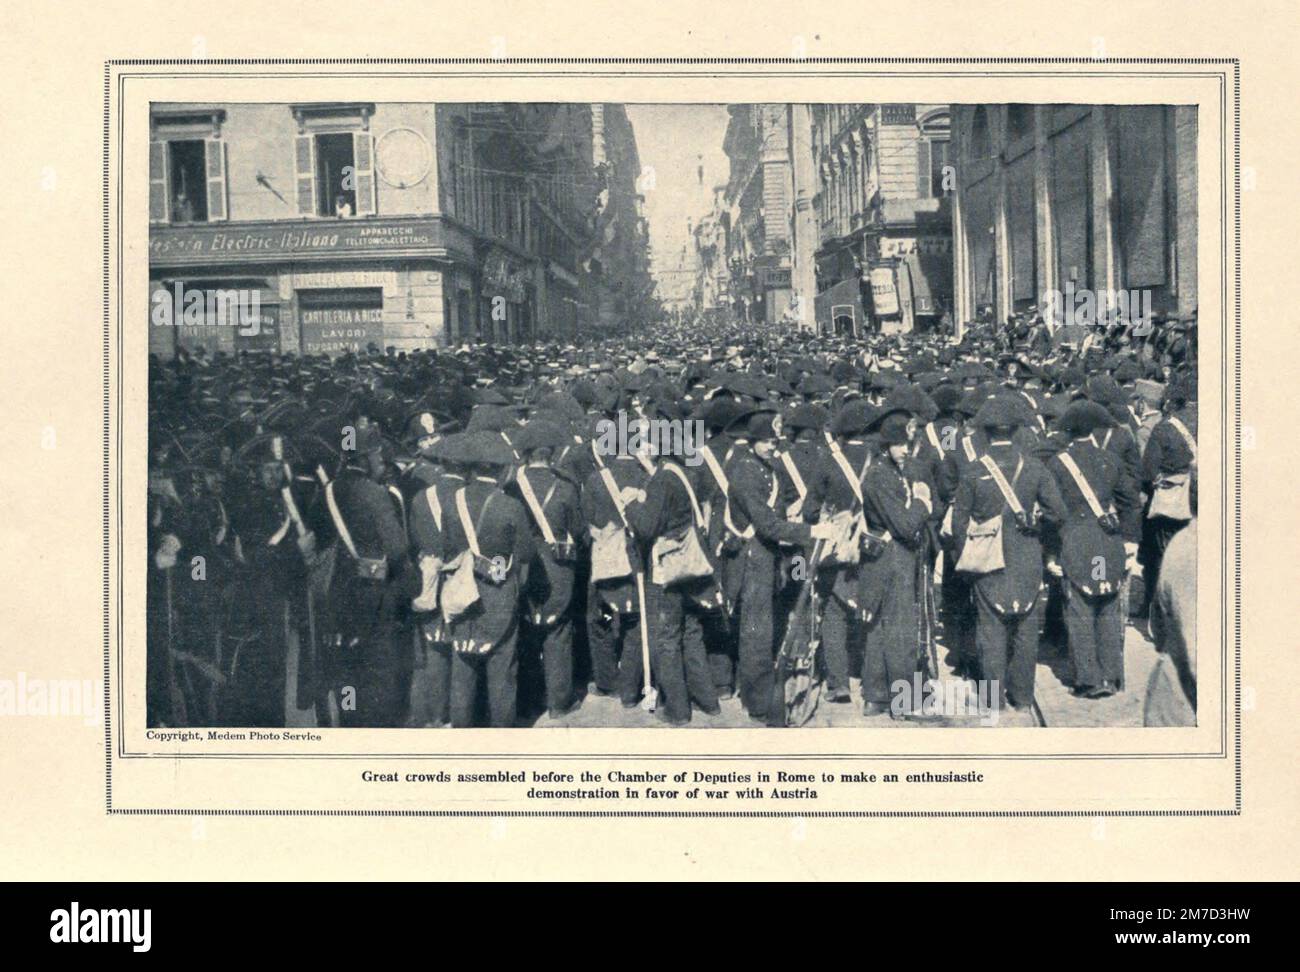 ITALIAN CROWDS CLAMORING FOR WAR WITH AUSTRIA from the book The story of the great war; the complete historical records of events to date DIPLOMATIC AND STATE PAPERS by Reynolds, Francis Joseph, 1867-1937; Churchill, Allen Leon; Miller, Francis Trevelyan, 1877-1959; Wood, Leonard, 1860-1927; Knight, Austin Melvin, 1854-1927; Palmer, Frederick, 1873-1958; Simonds, Frank Herbert, 1878-; Ruhl, Arthur Brown, 1876-  Volume VI Published 1920 Stock Photo